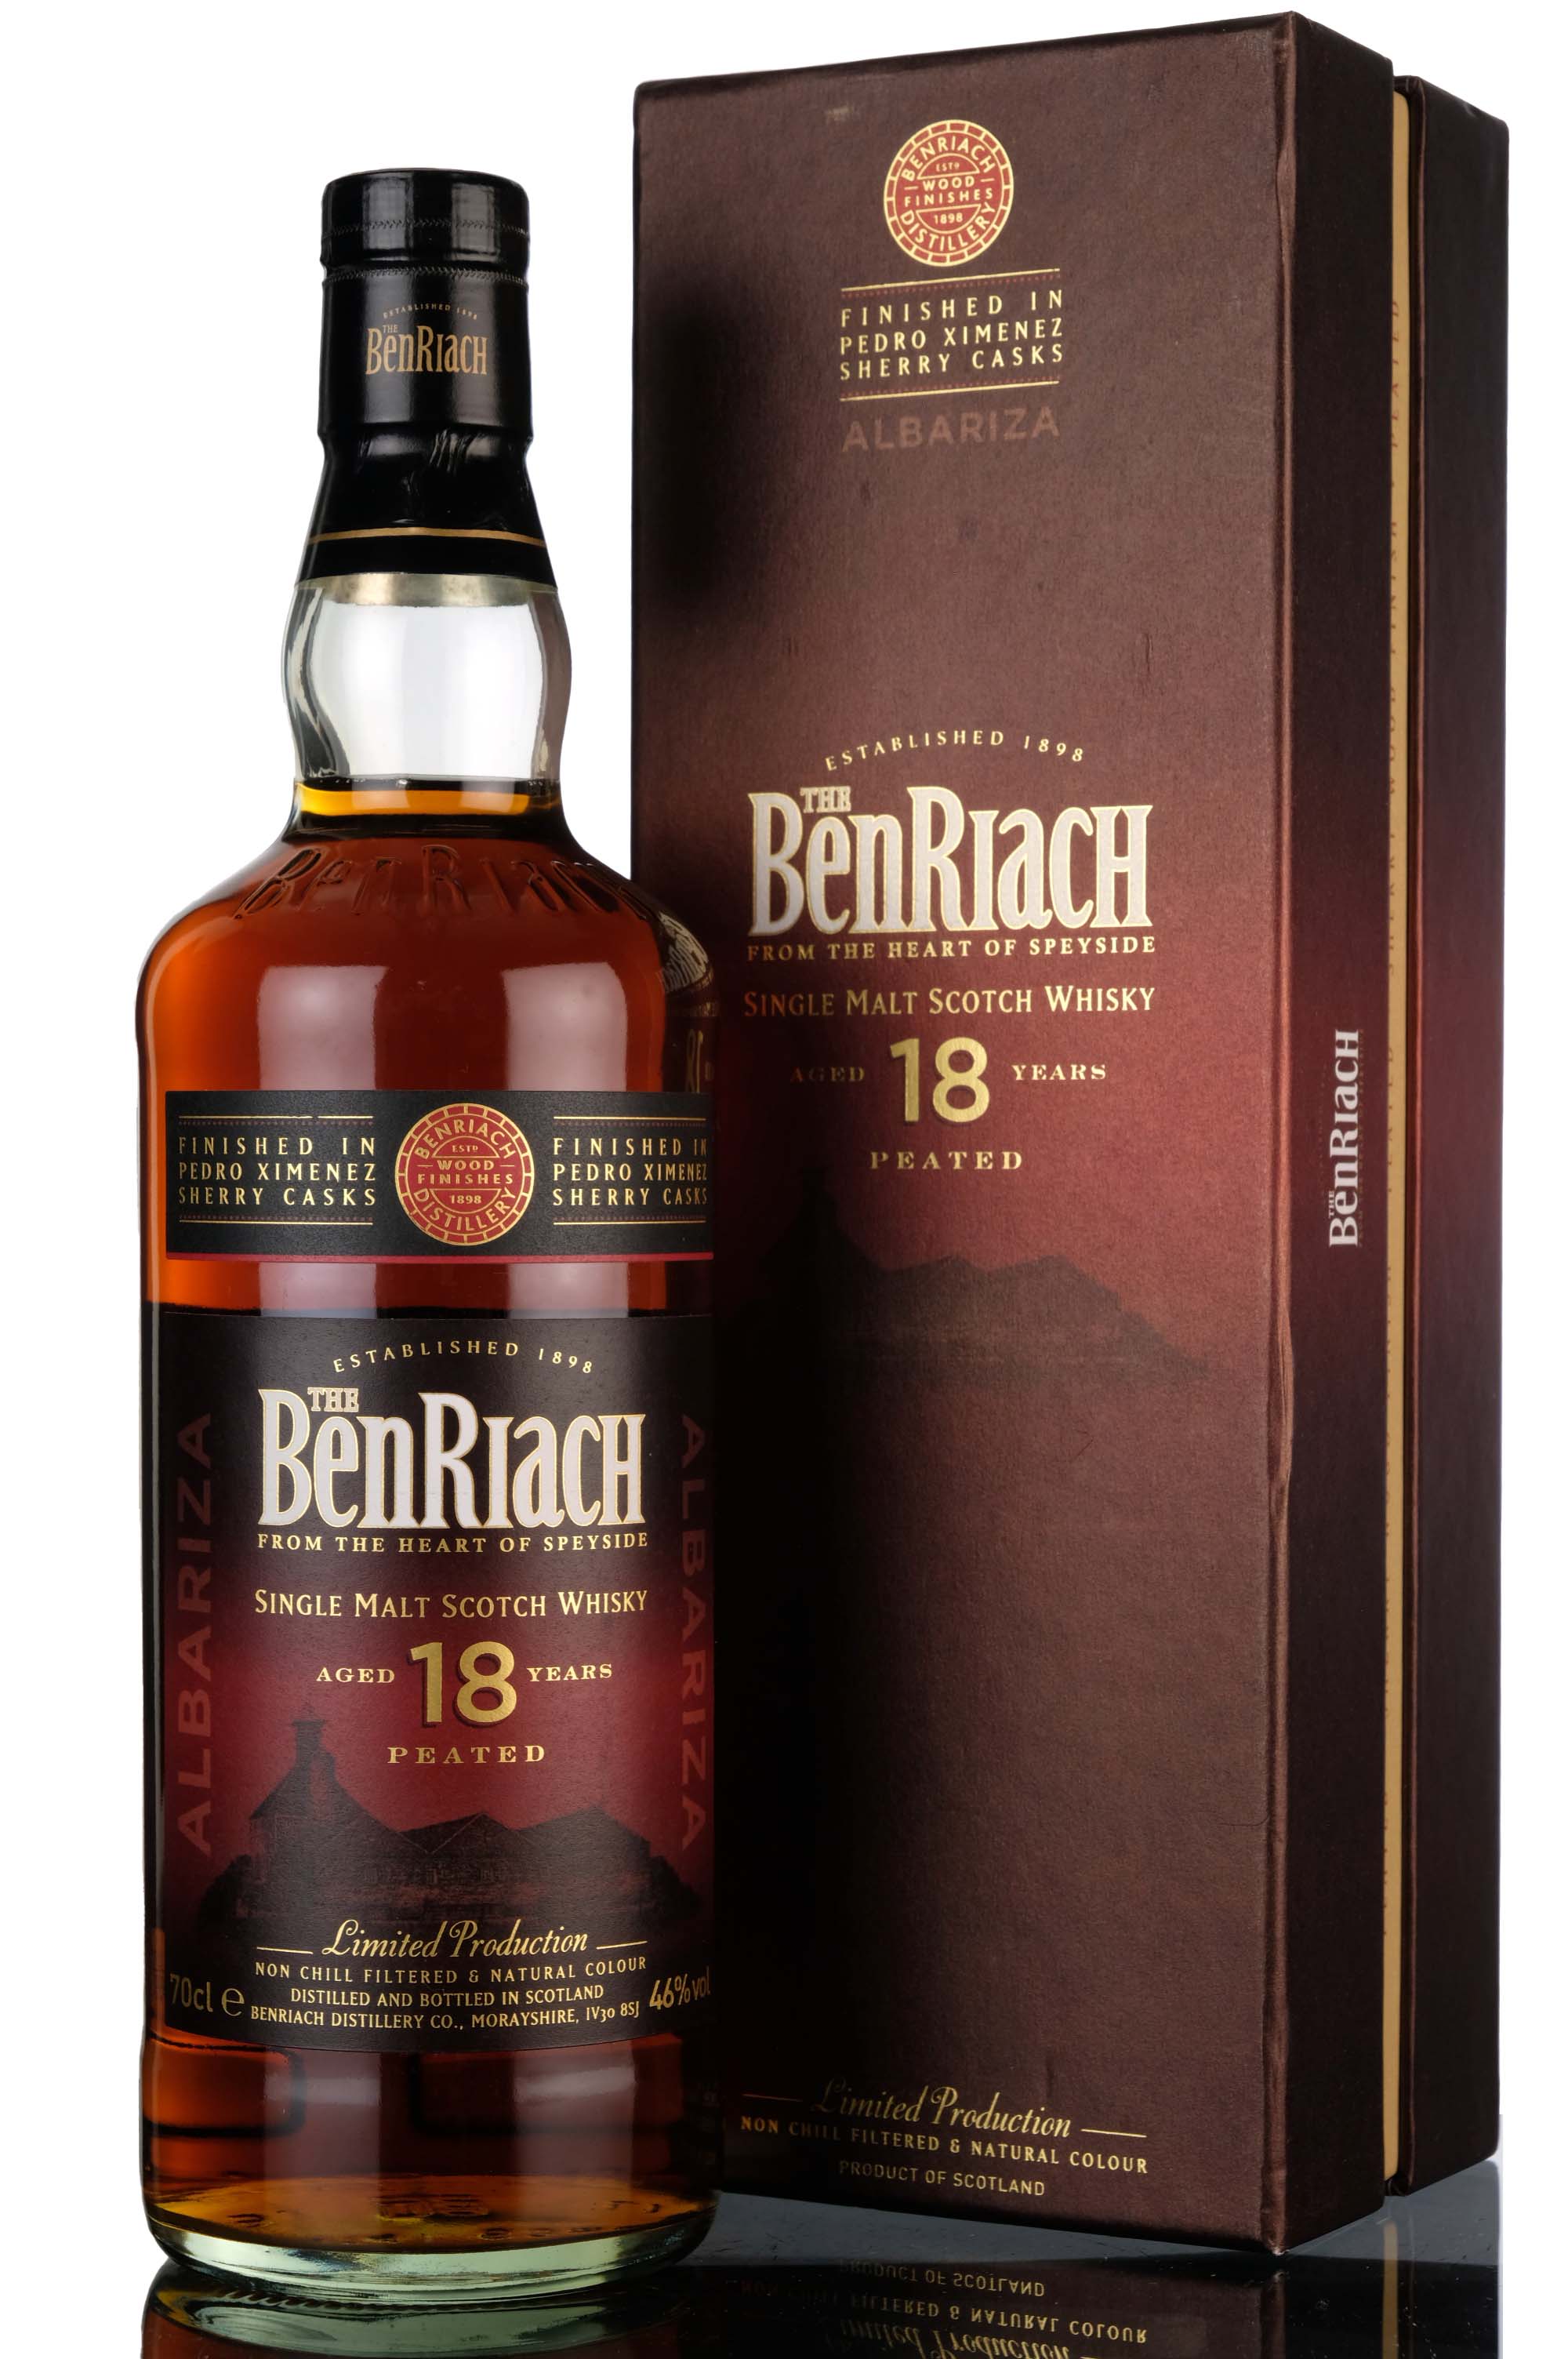 Benriach 18 Year Old - Albariza - 2015 Release